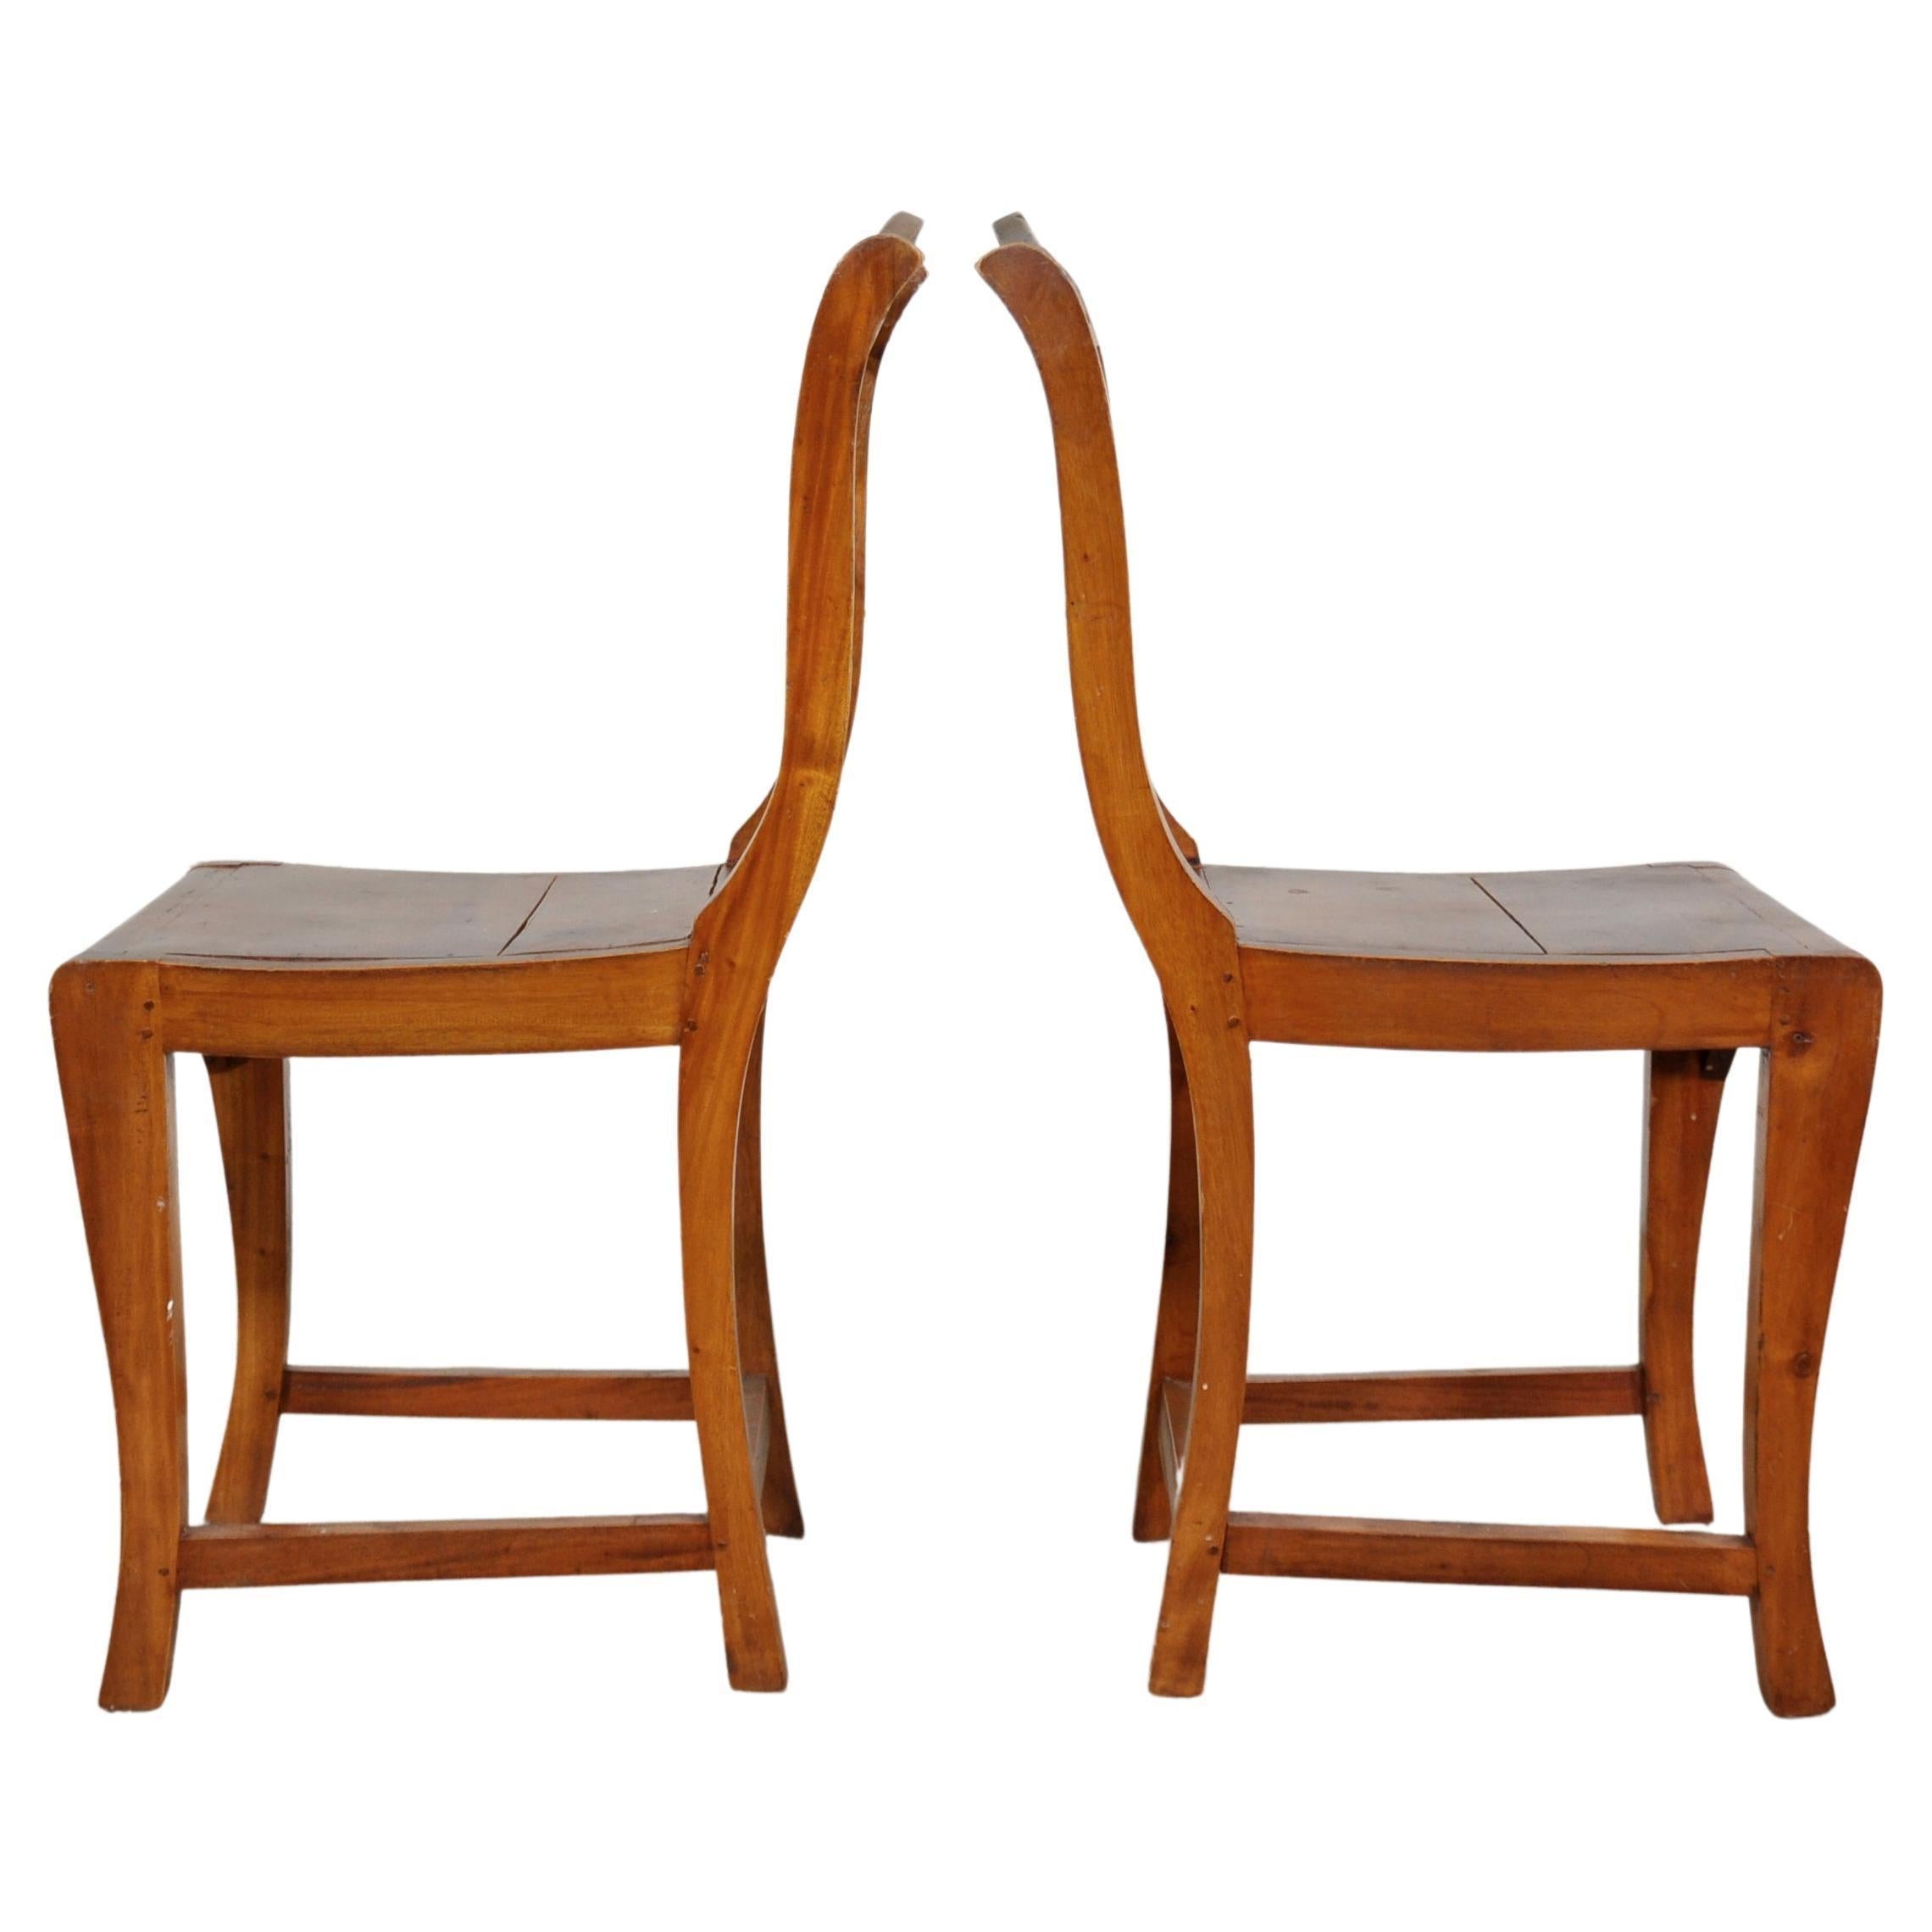 Fruitwood French Country Rustic Side Chairs - a Pair For Sale